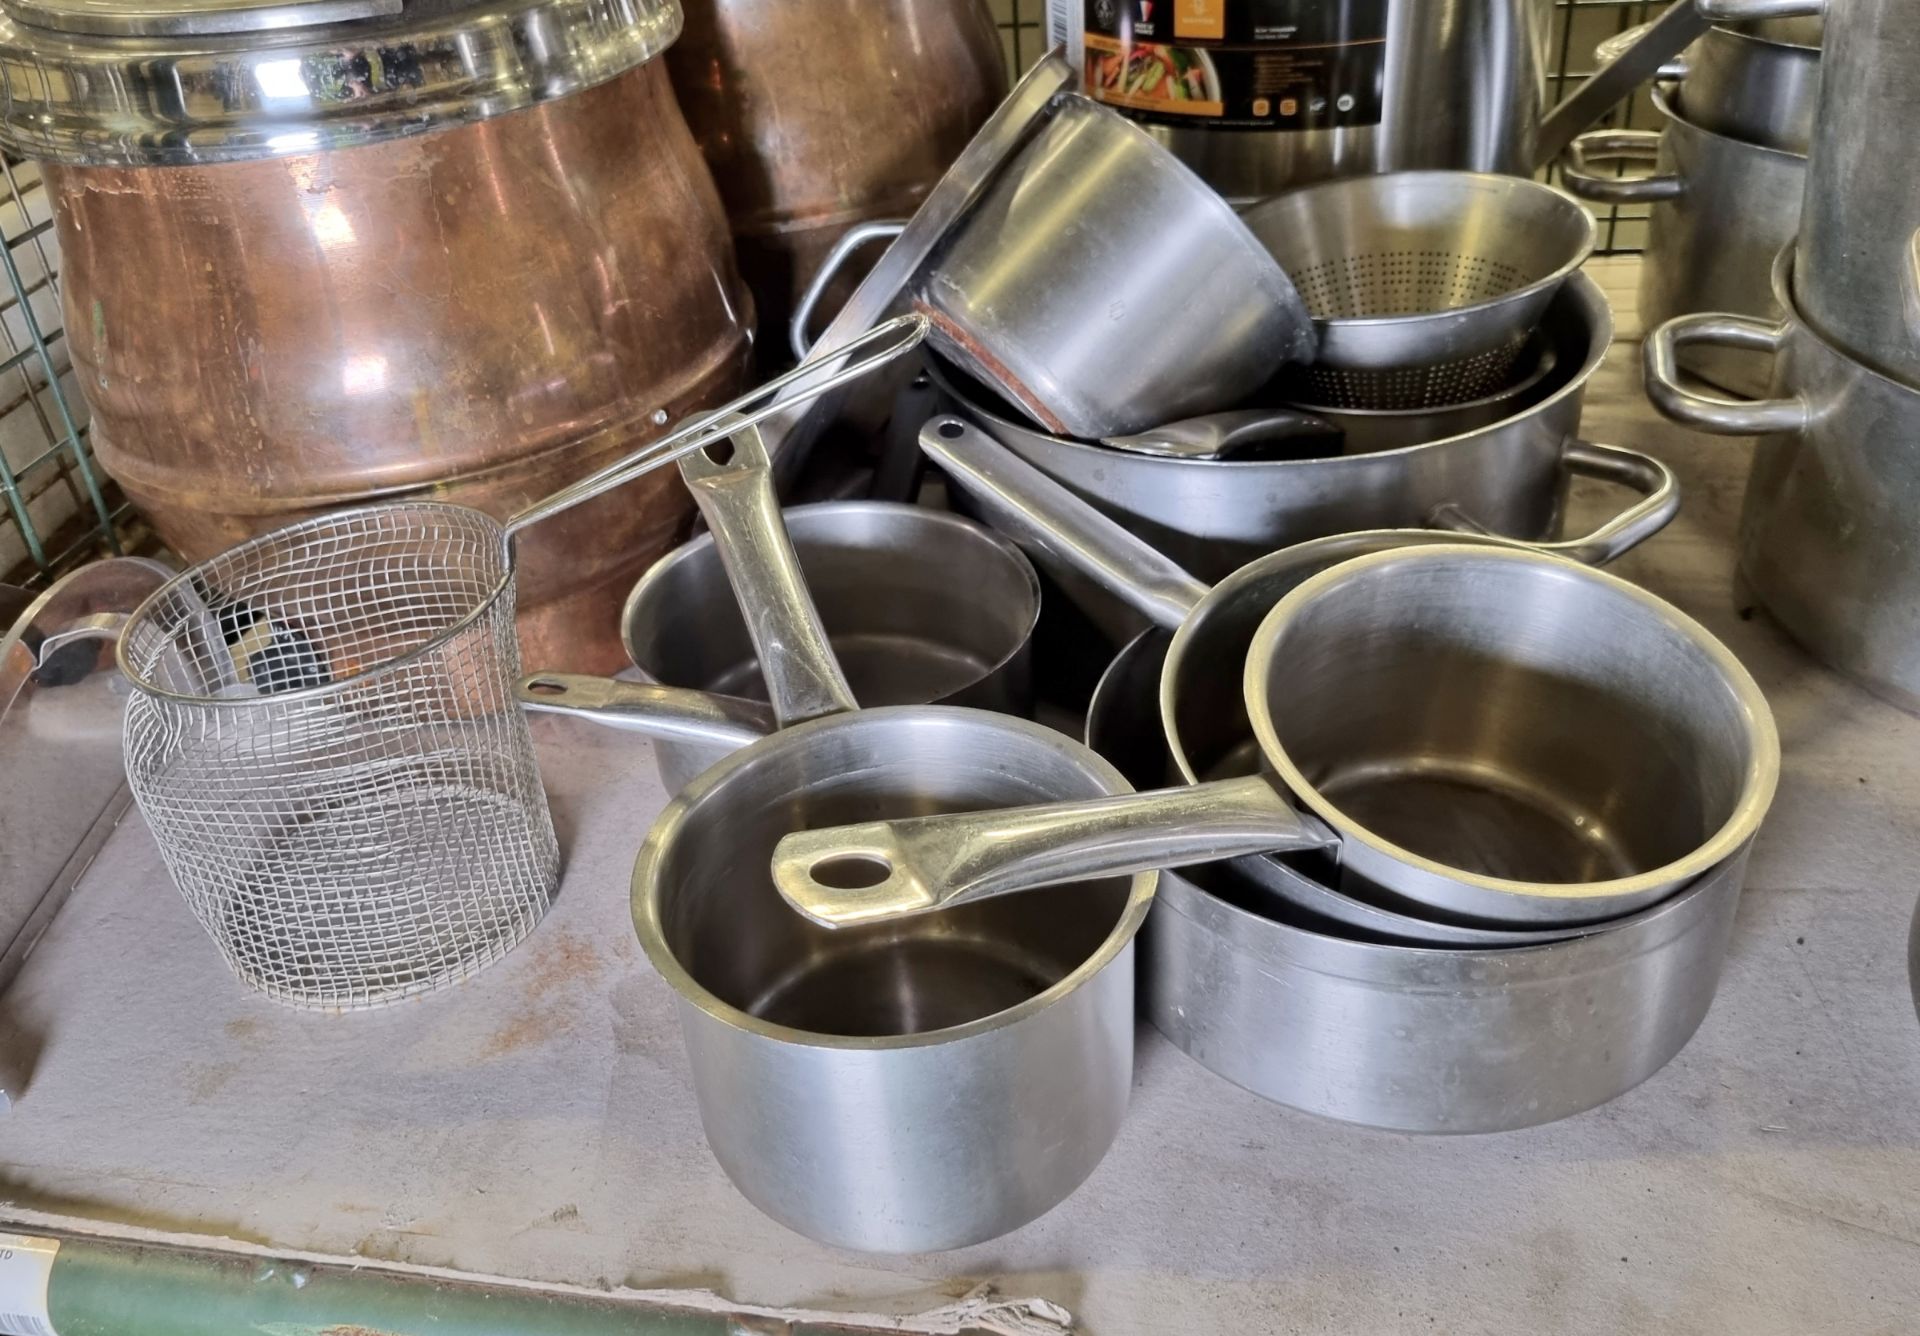 Catering spares - stainless steel pots mixed shapes and sizes - soup kettles - Image 3 of 4